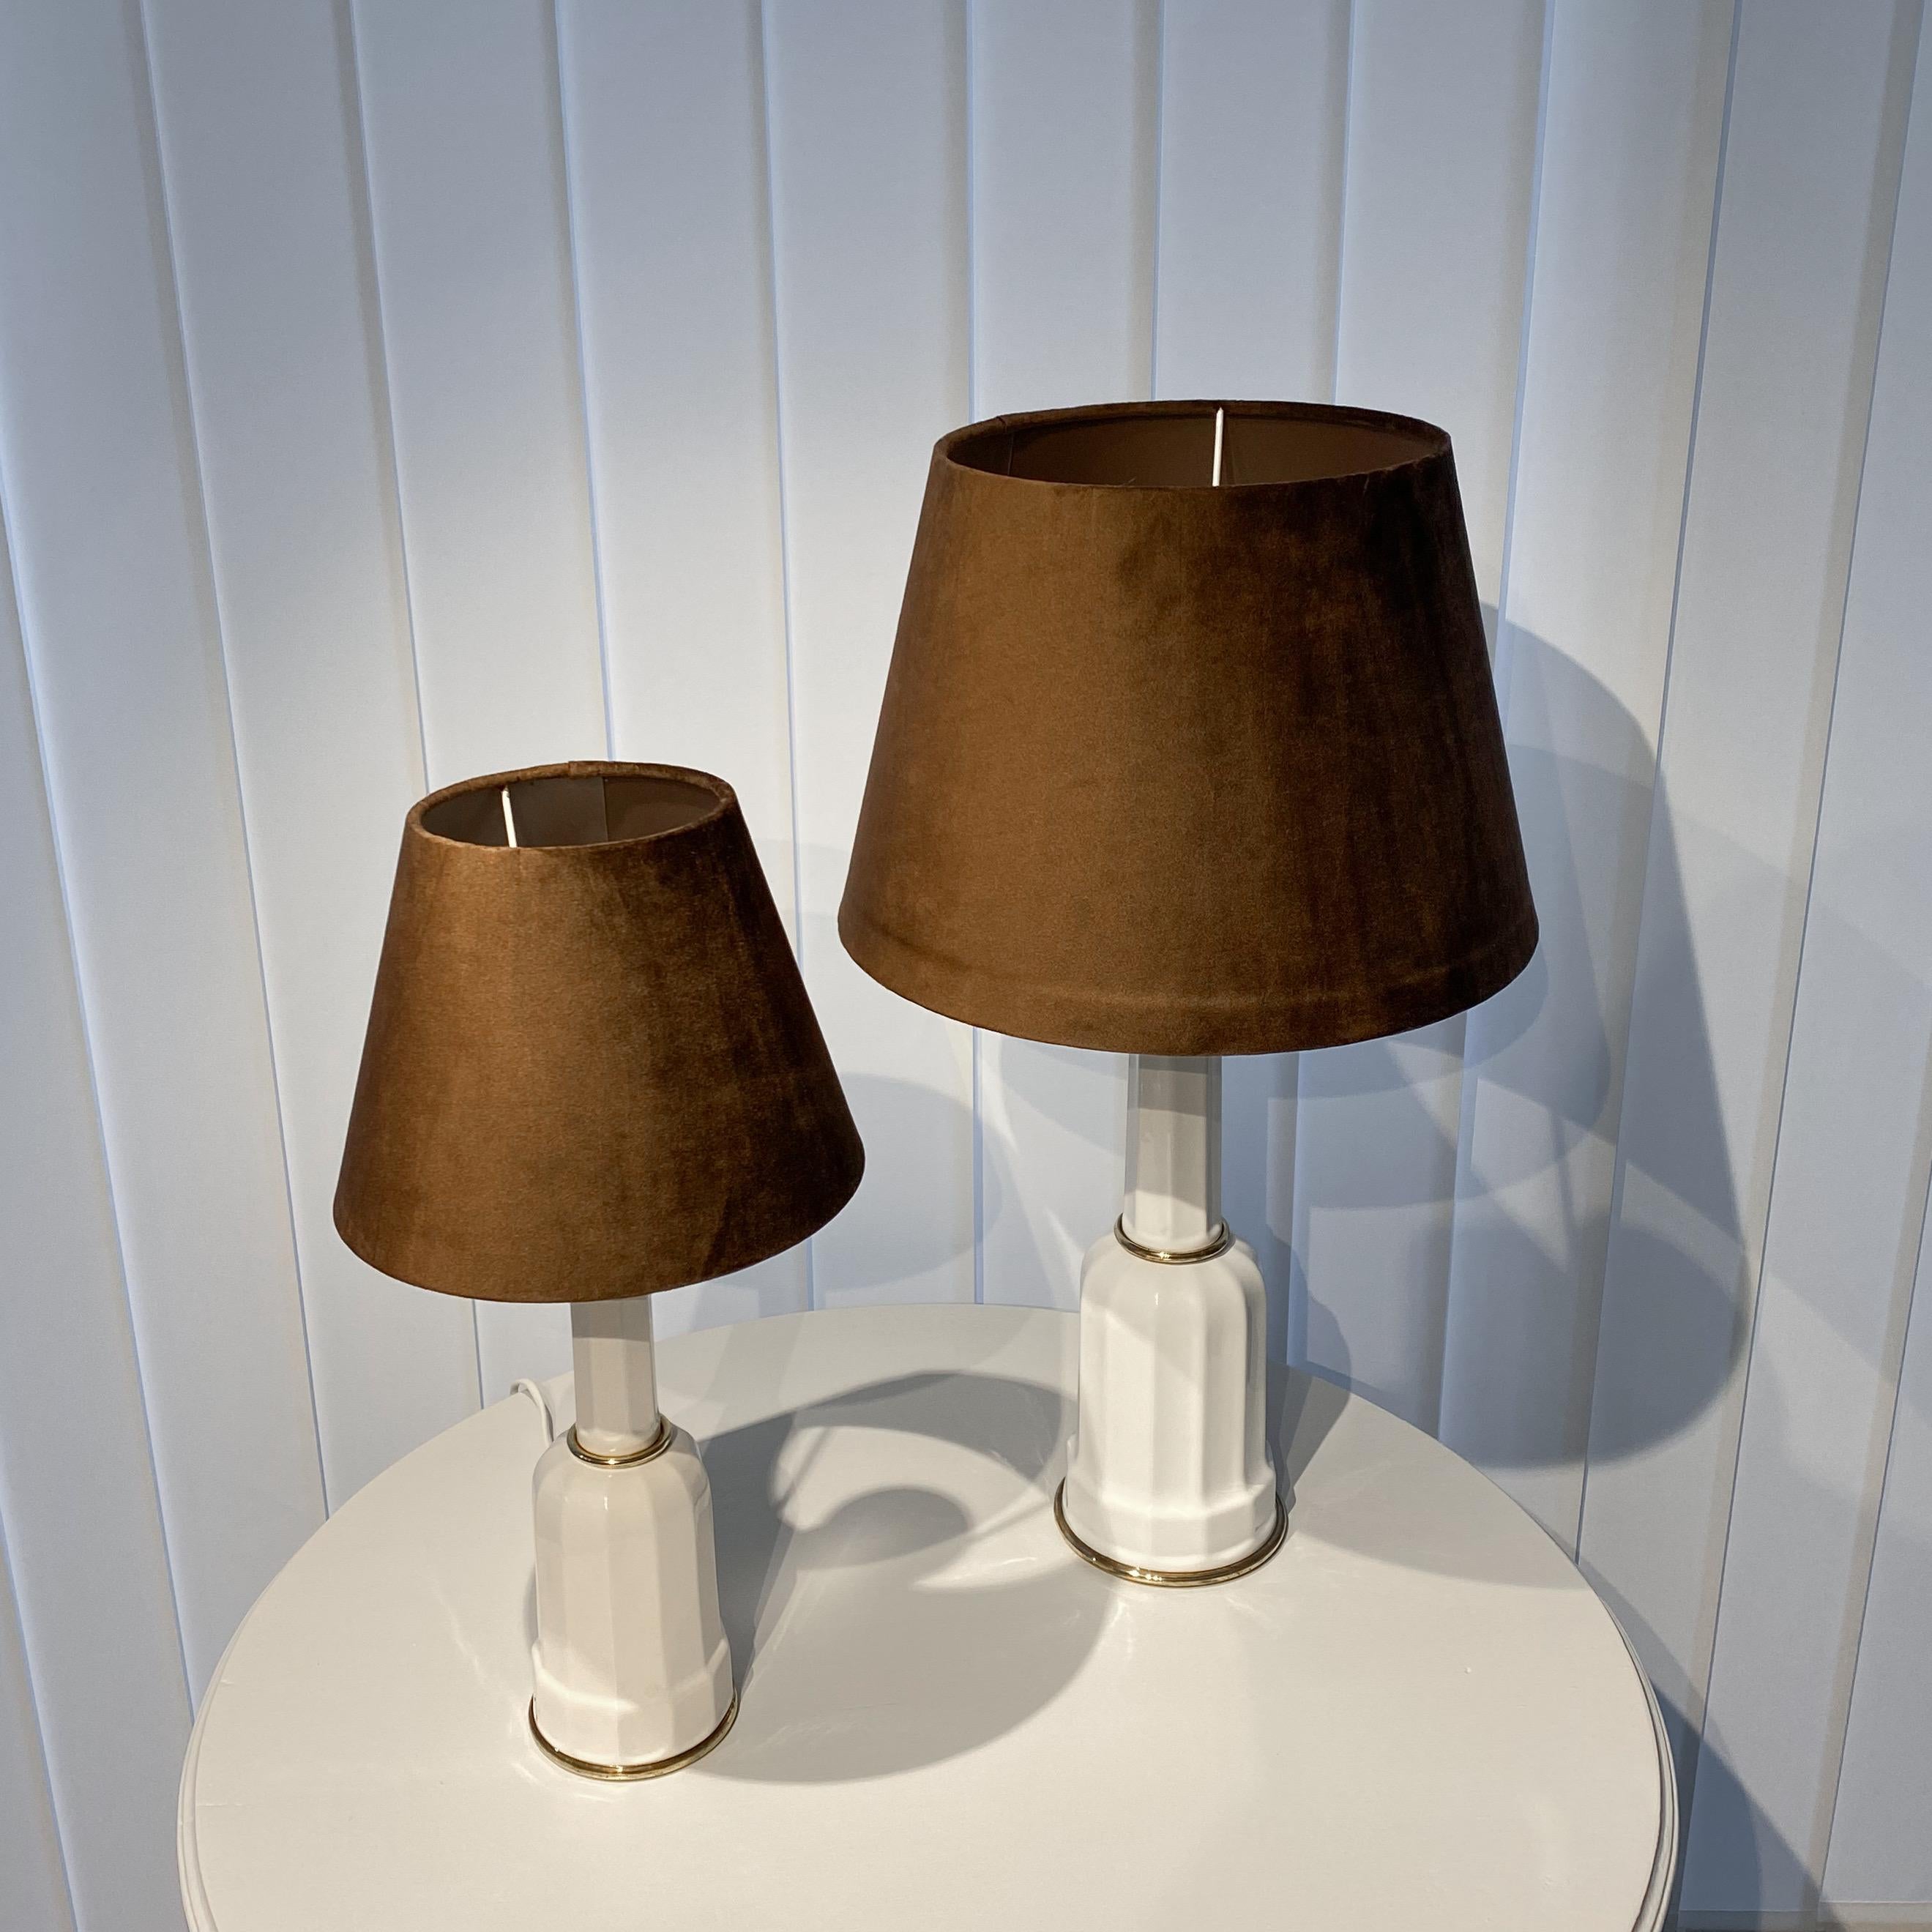 Vintage Danish Heiberg table lamps, porcelain and brass In Good Condition For Sale In Forserum, SE